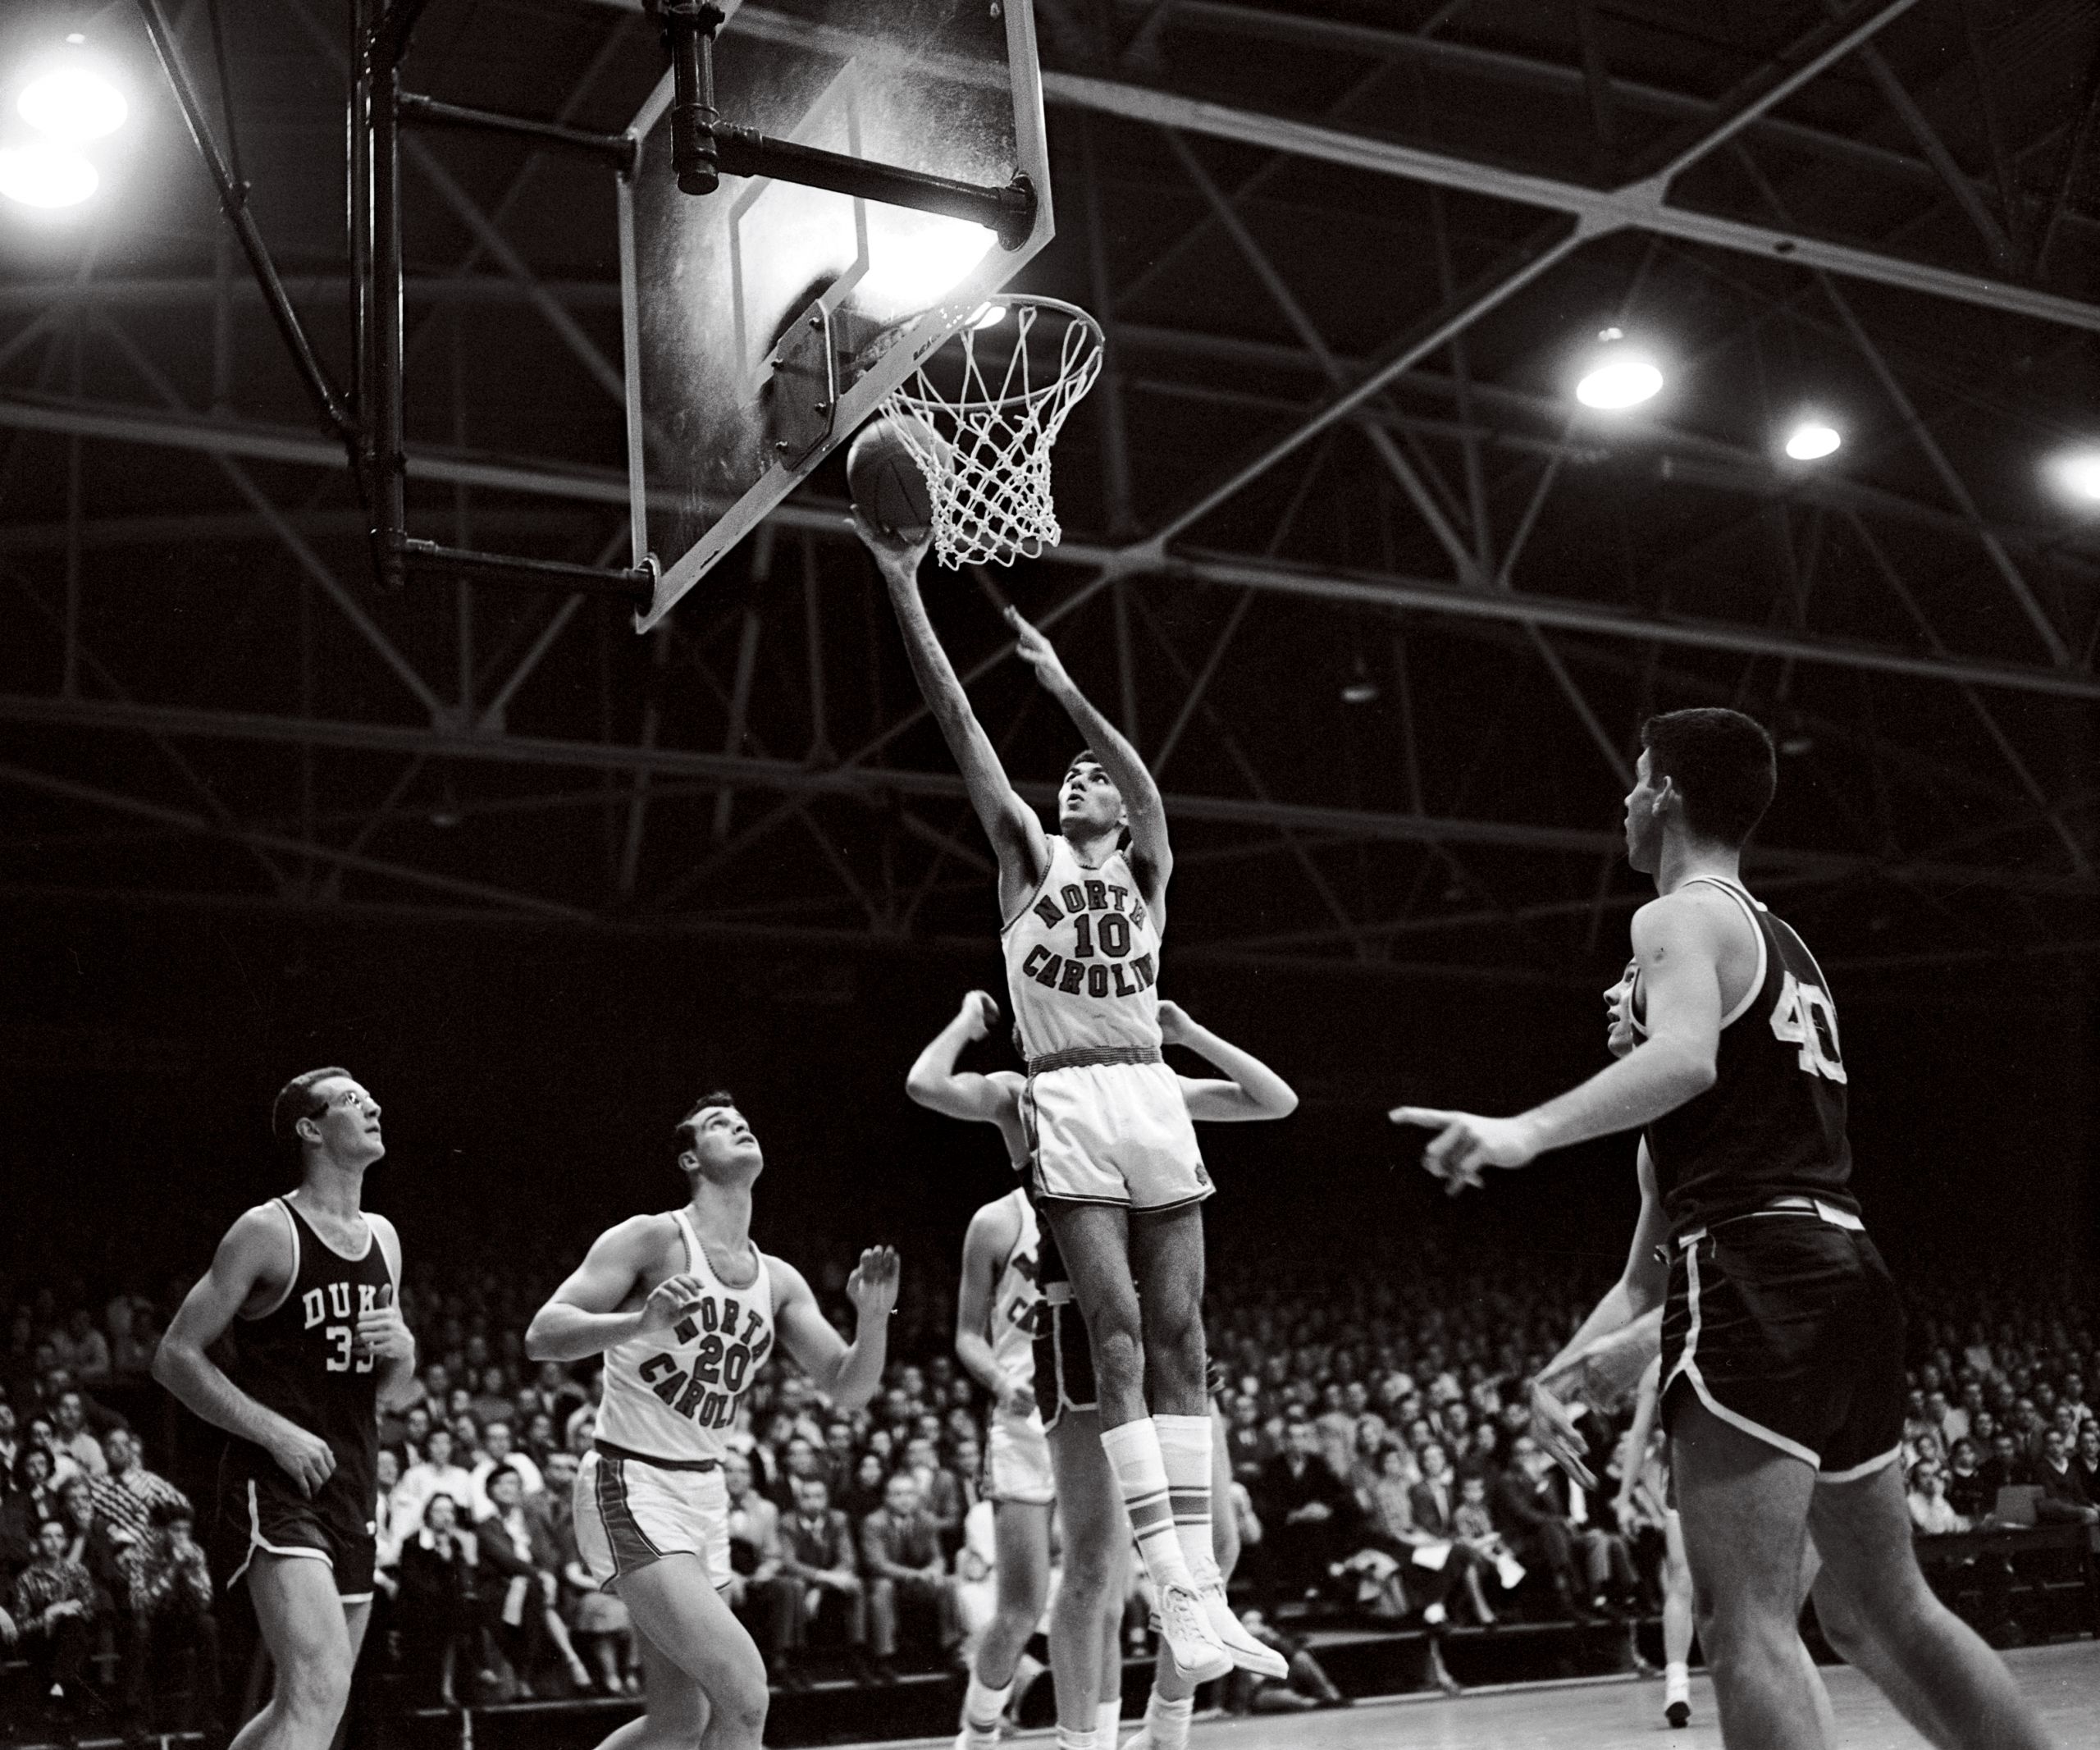 Rosenbluth uses his long reach against Duke on Feb. 9. Carolina took it, 75-73, one of three over the Blue Devils. No. 20 is Bob Young ’57, one of five  surviving members of the team. (North Carolina Collection photo)